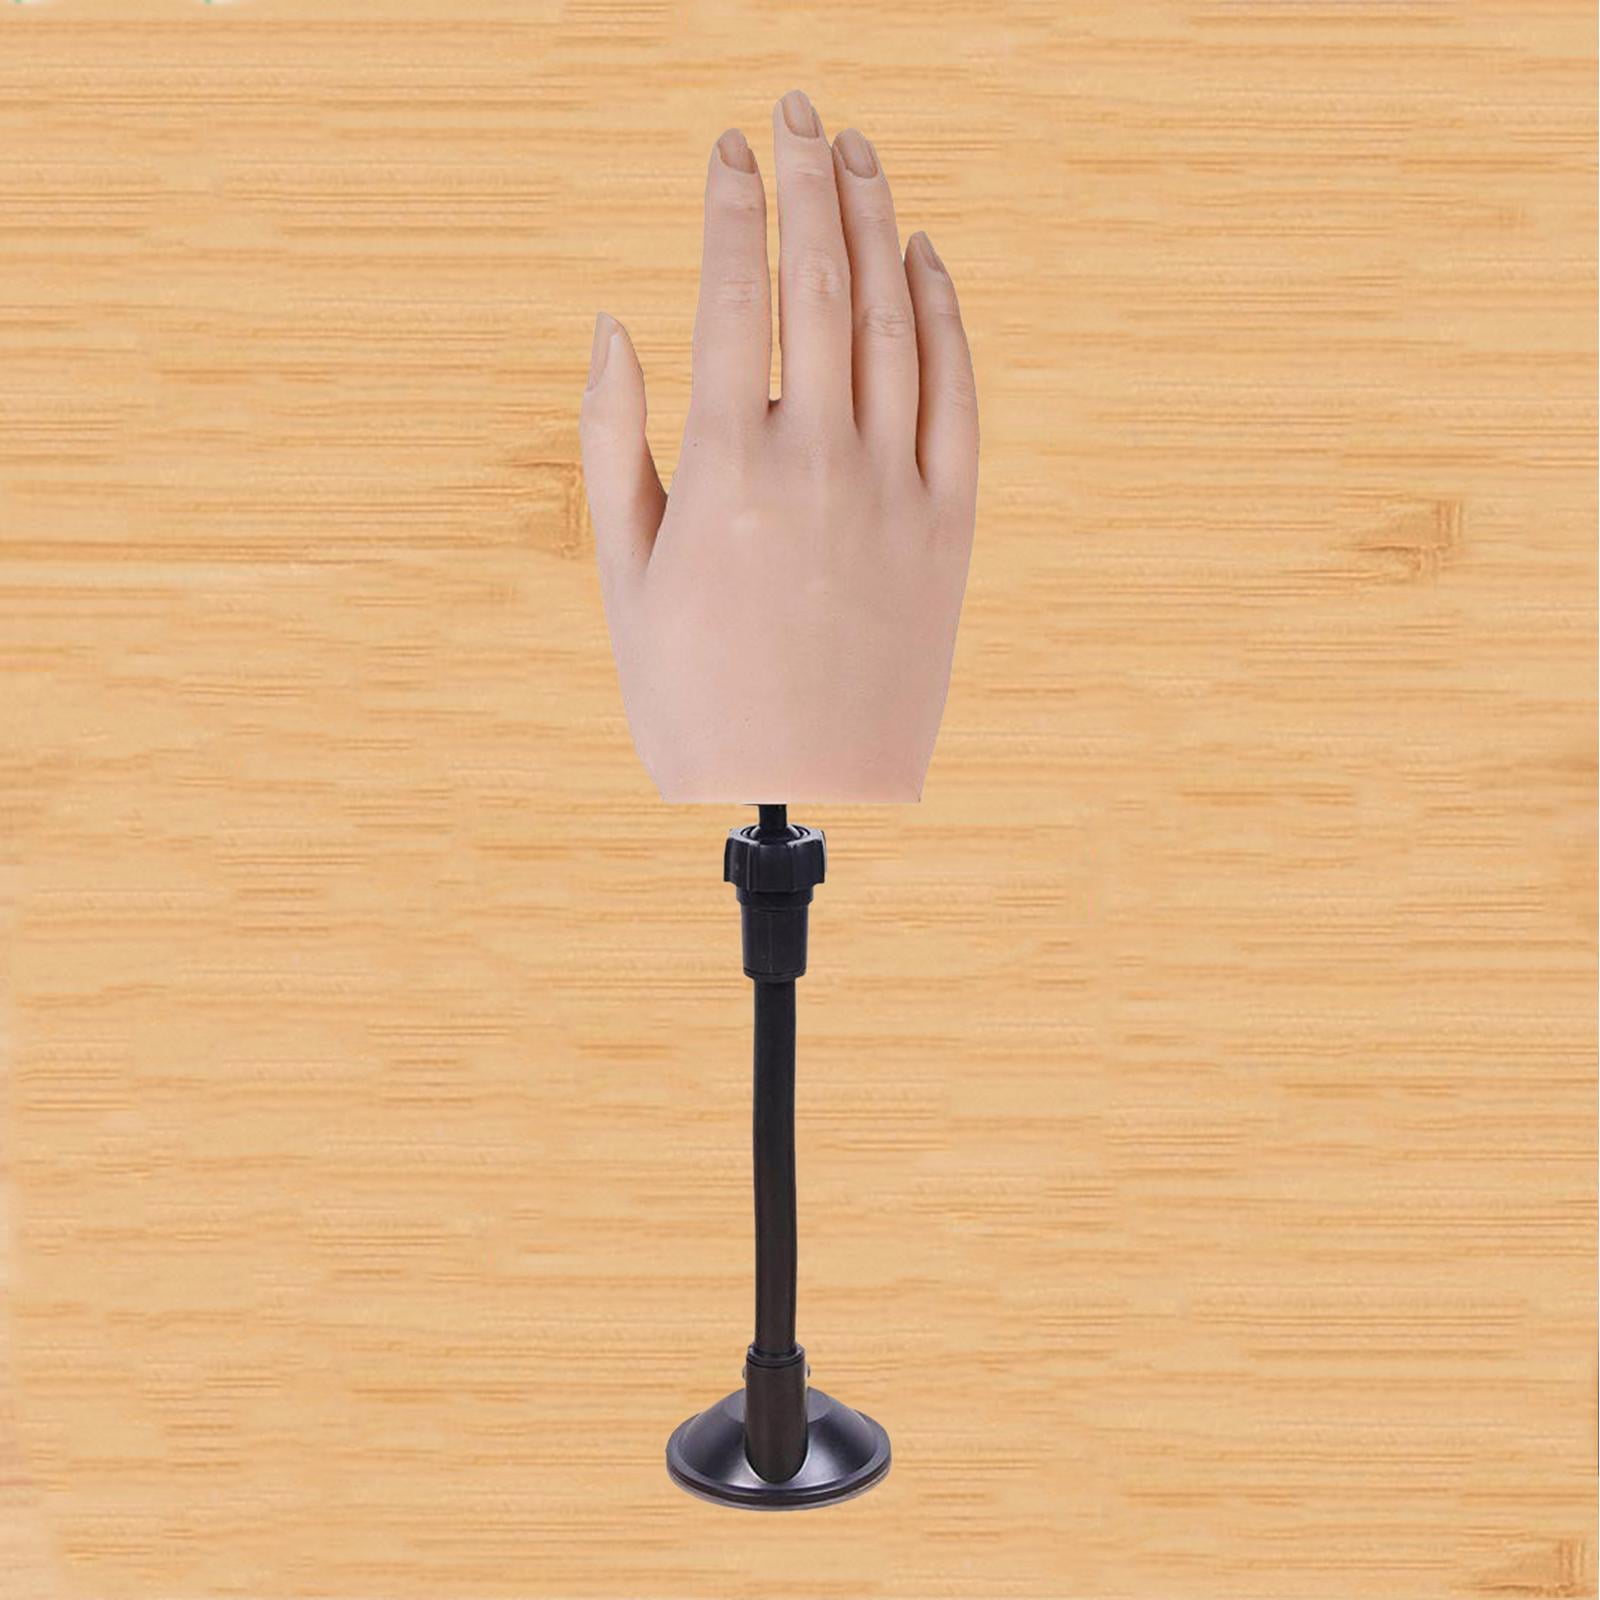 Silic Practice Hand with Stand Holder for Acrylic Nails, Fingers